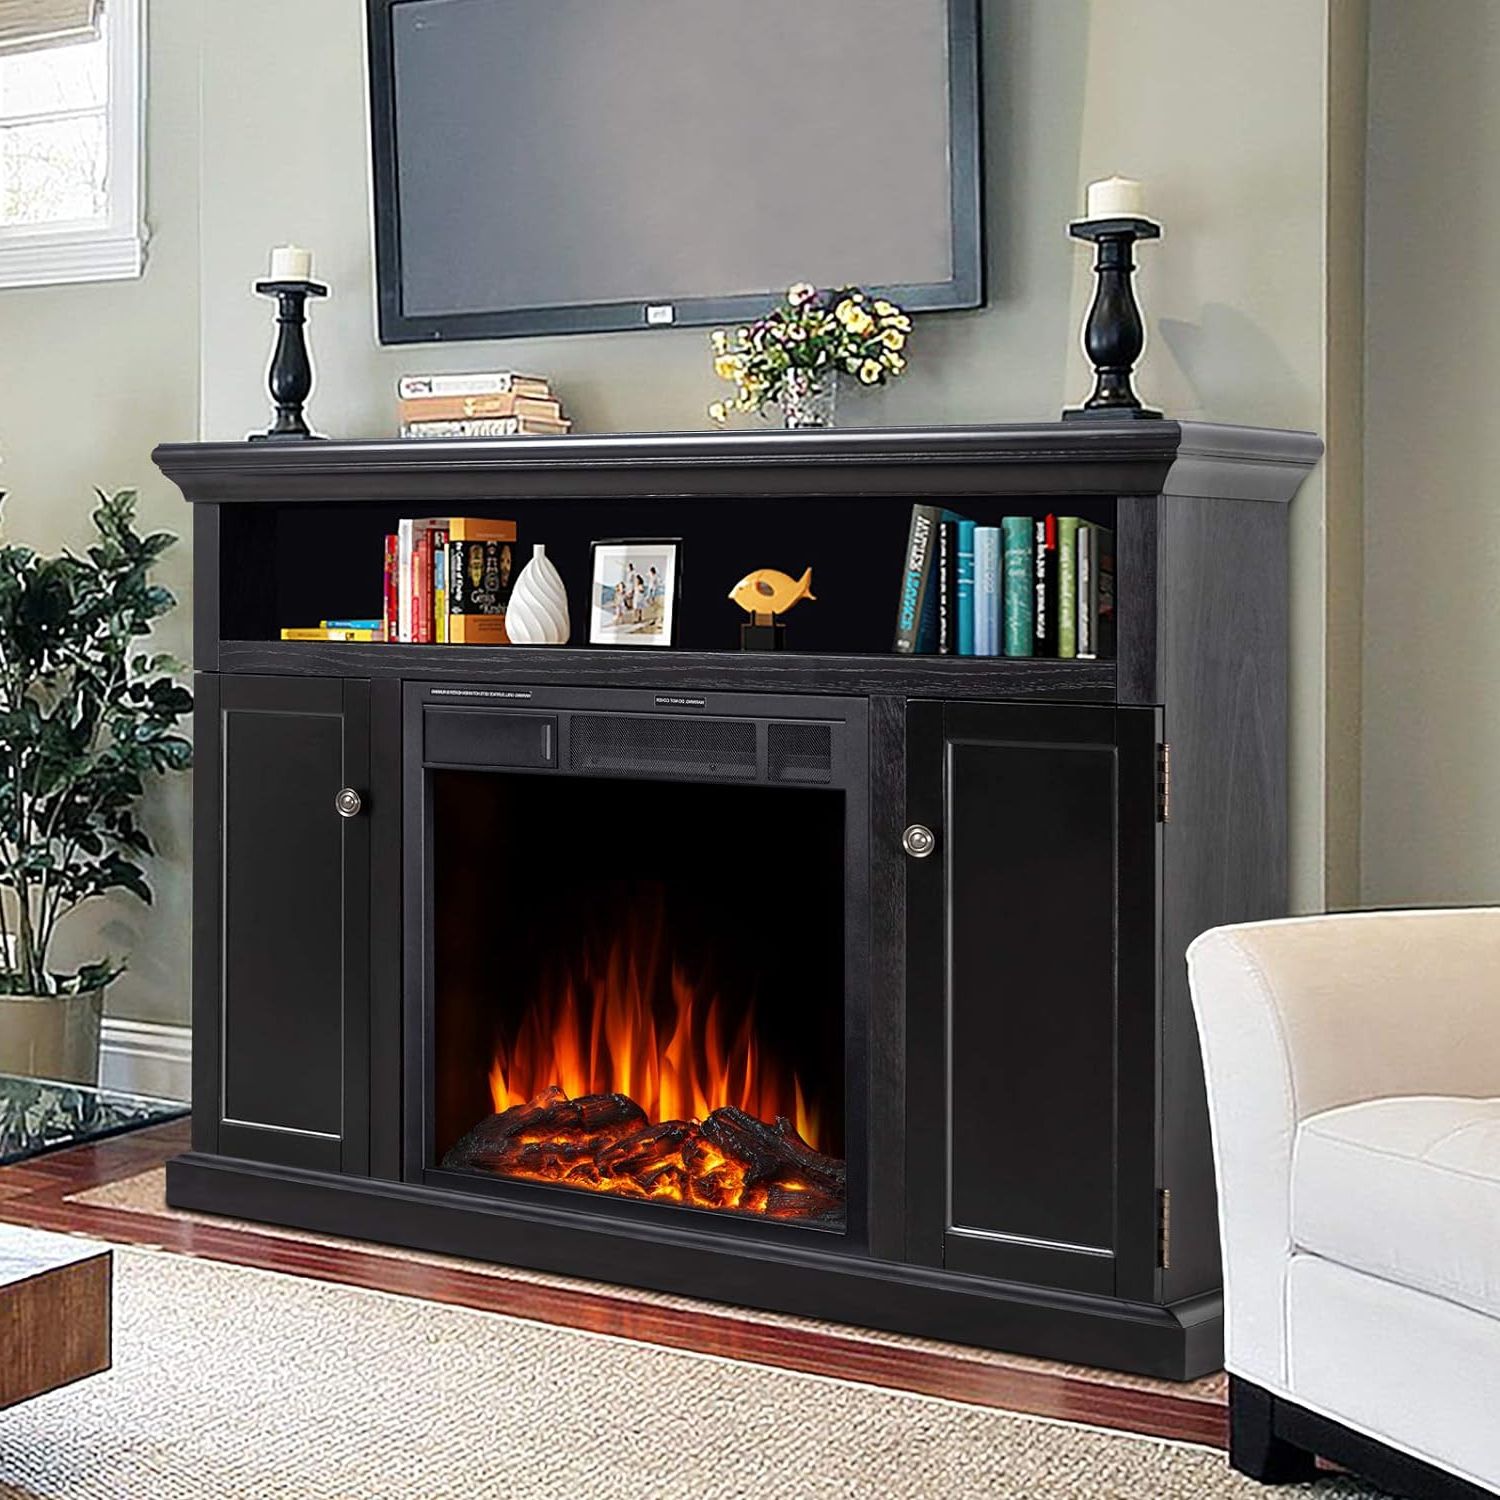 Recent Tv Stands With Electric Fireplace Regarding Amazon: Jamfly Electric Fireplace Tv Stand Wood Mantel For Tv Up To (View 6 of 15)